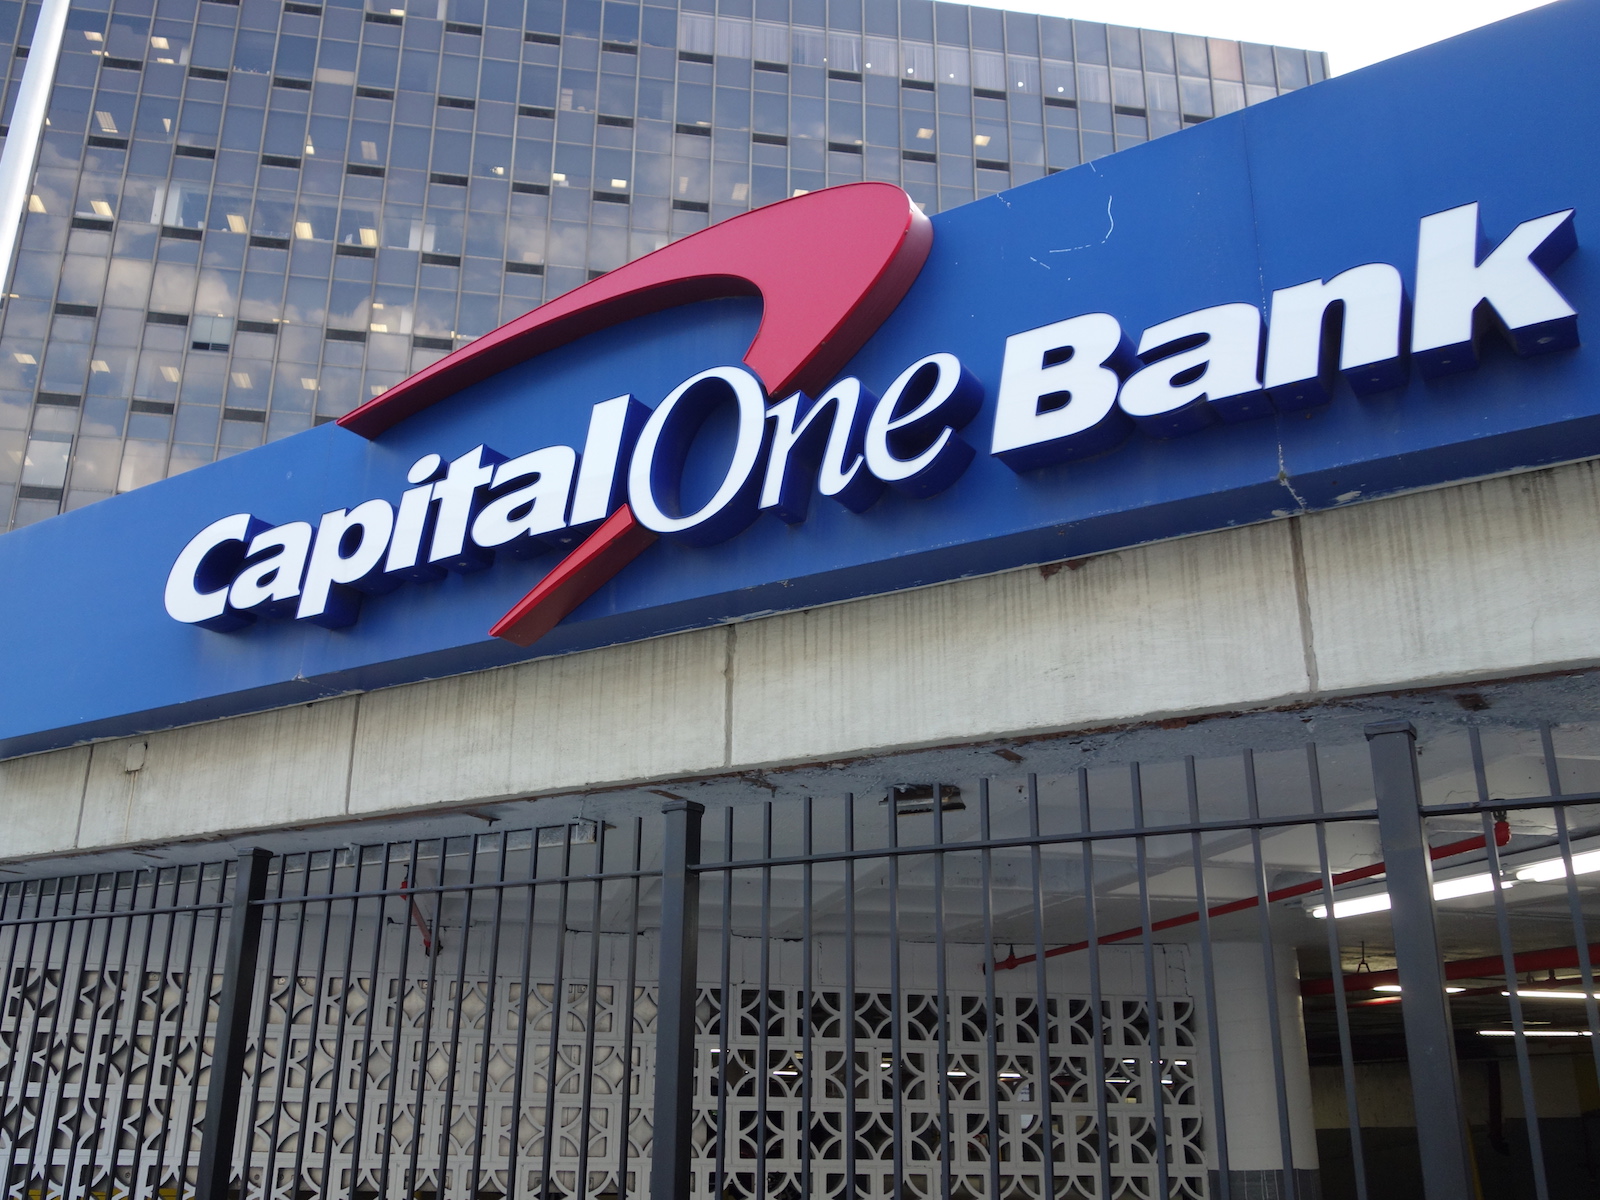 Capital One credit cards